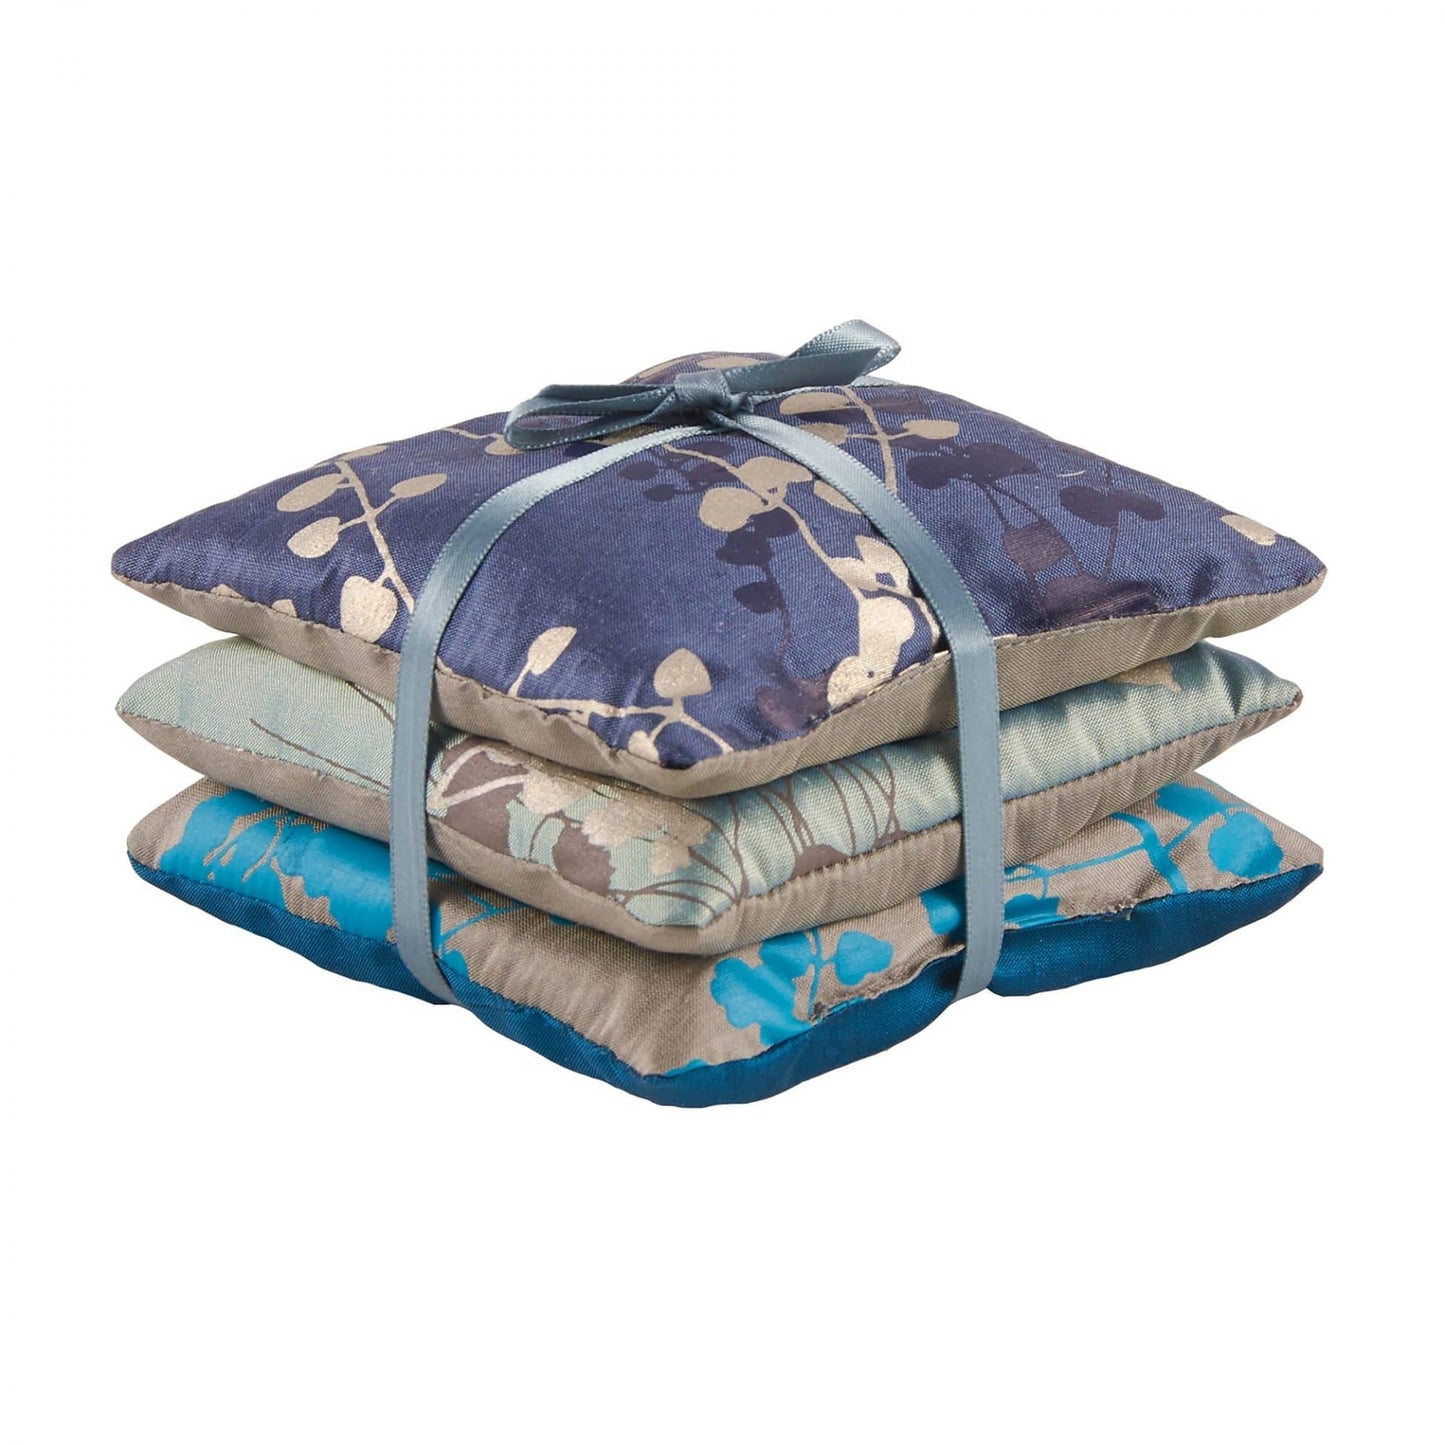 Gift: Clarissa Hulse Silk Lavender Bags (UK/EUROPE ONLY)